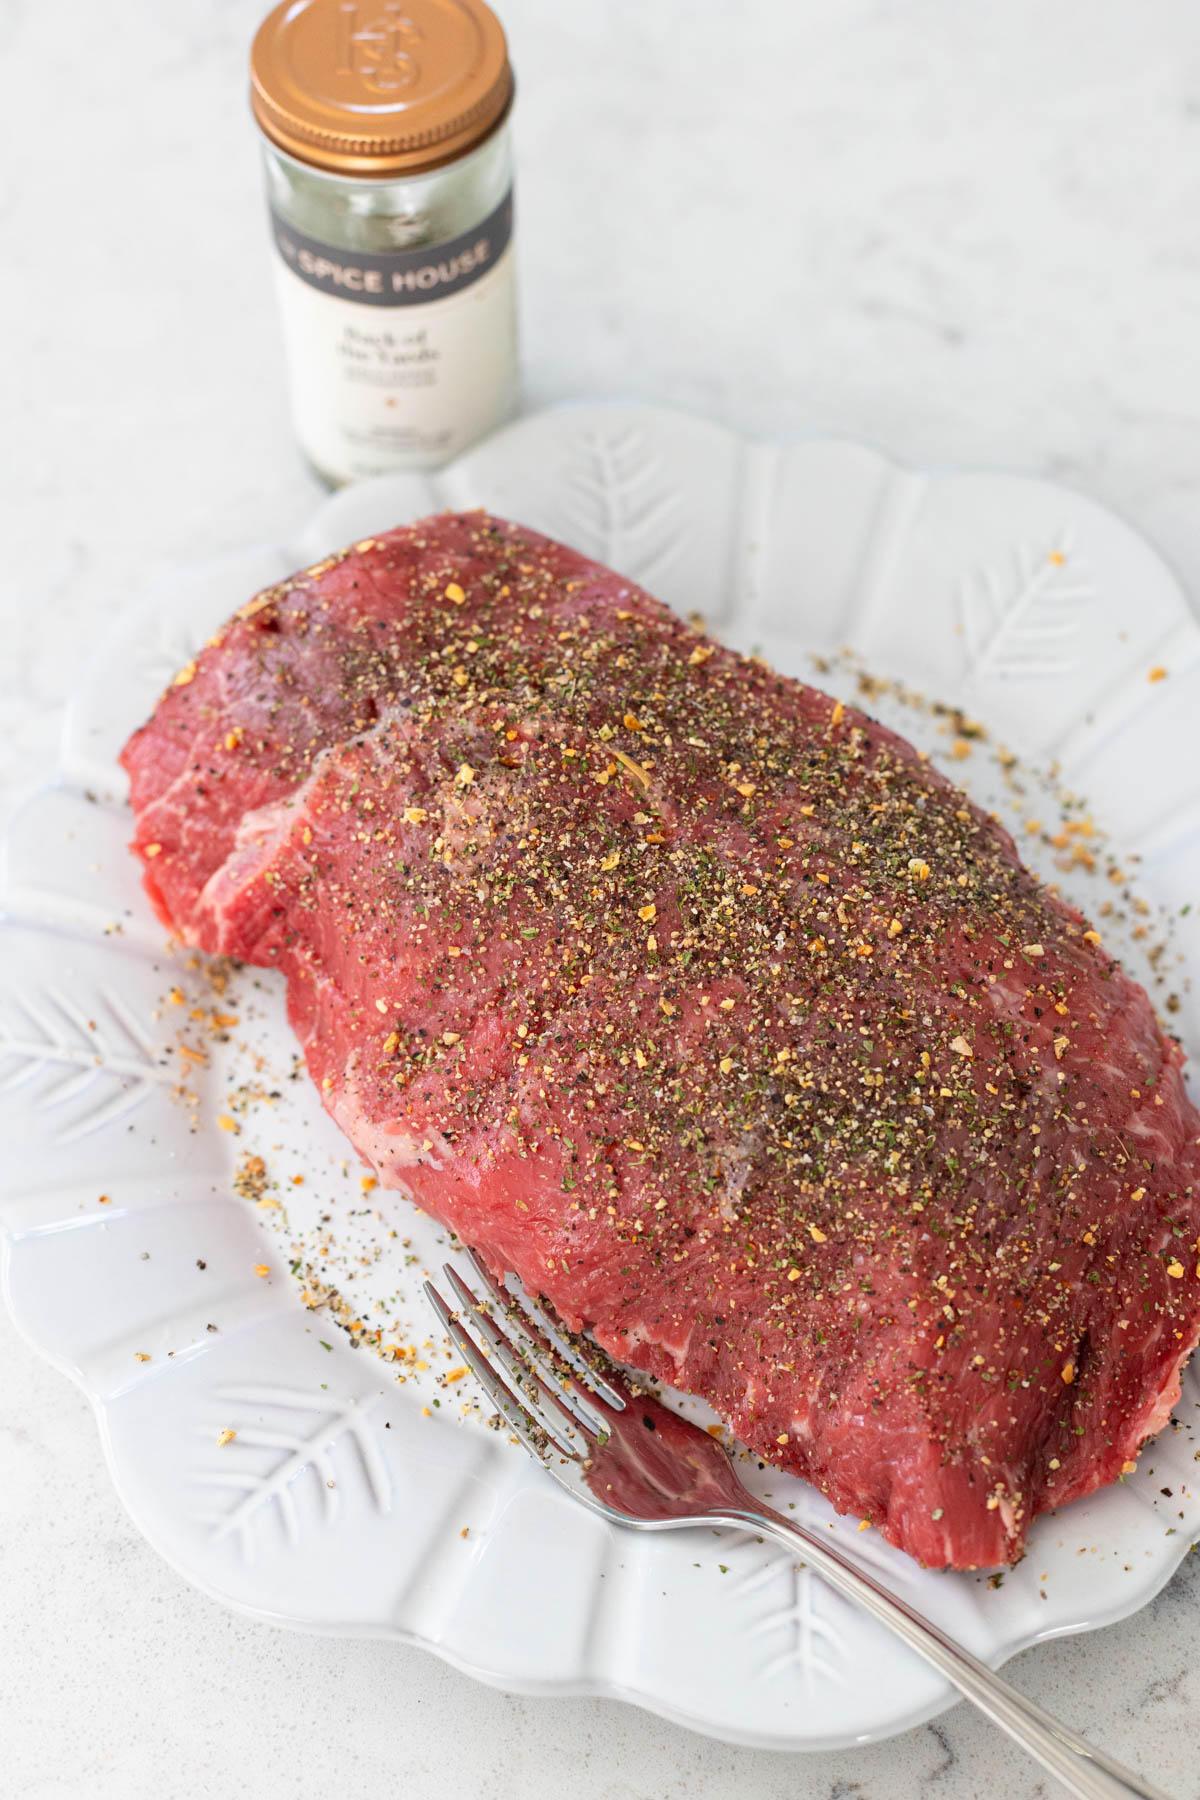 The chuck roast is on a dinner plate and has been sprinkled with seasonings on both sides.